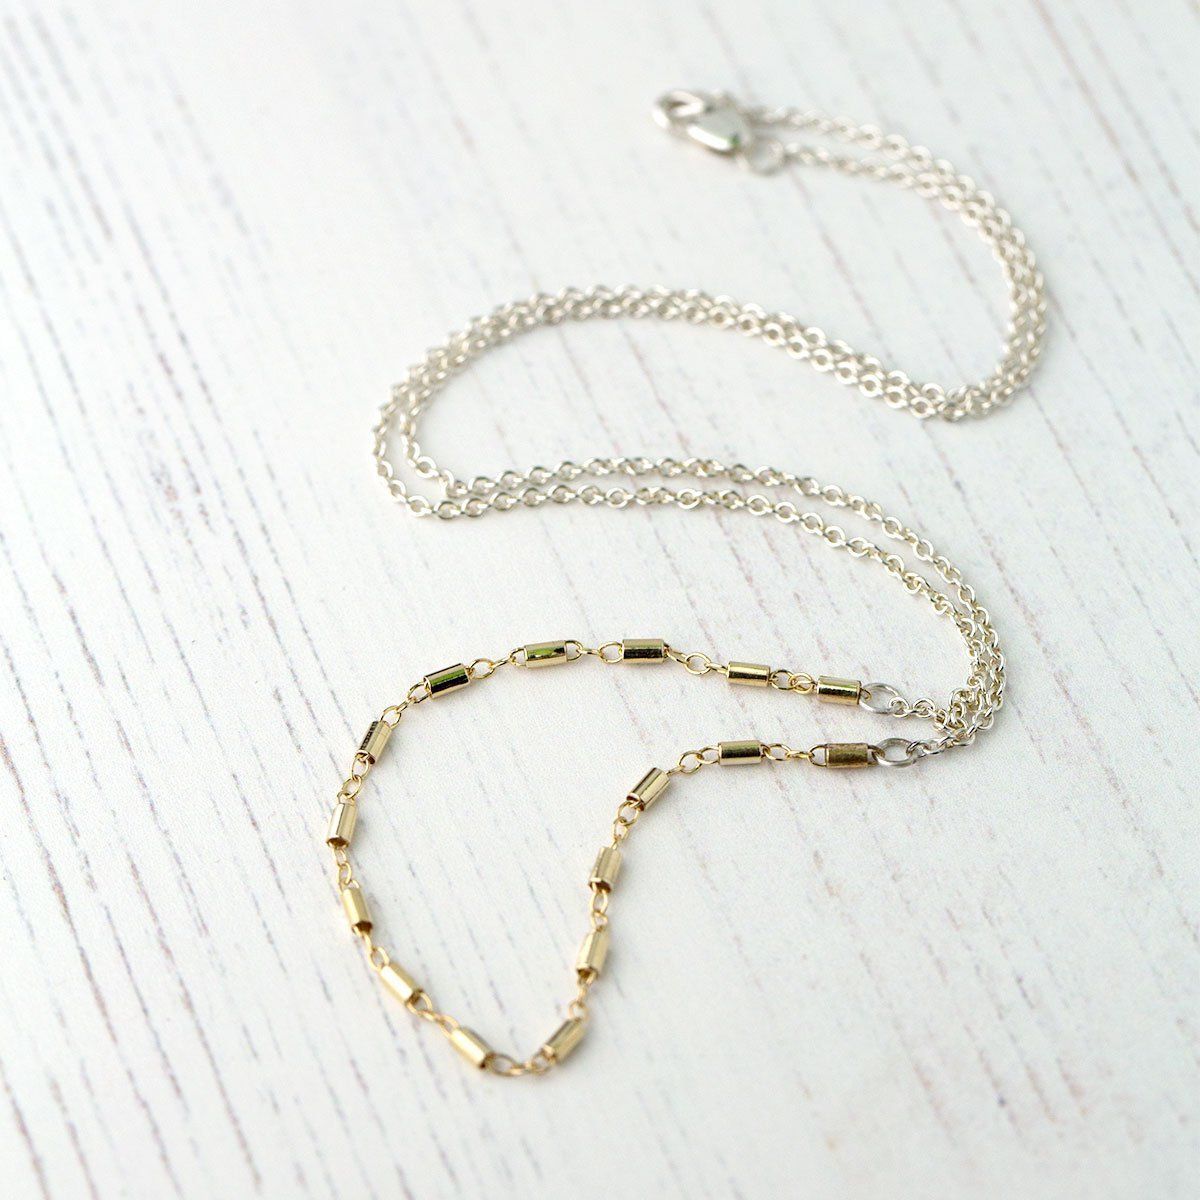 Mixed Metals Gold &amp; Silver Necklace - Handmade Jewelry by Burnish